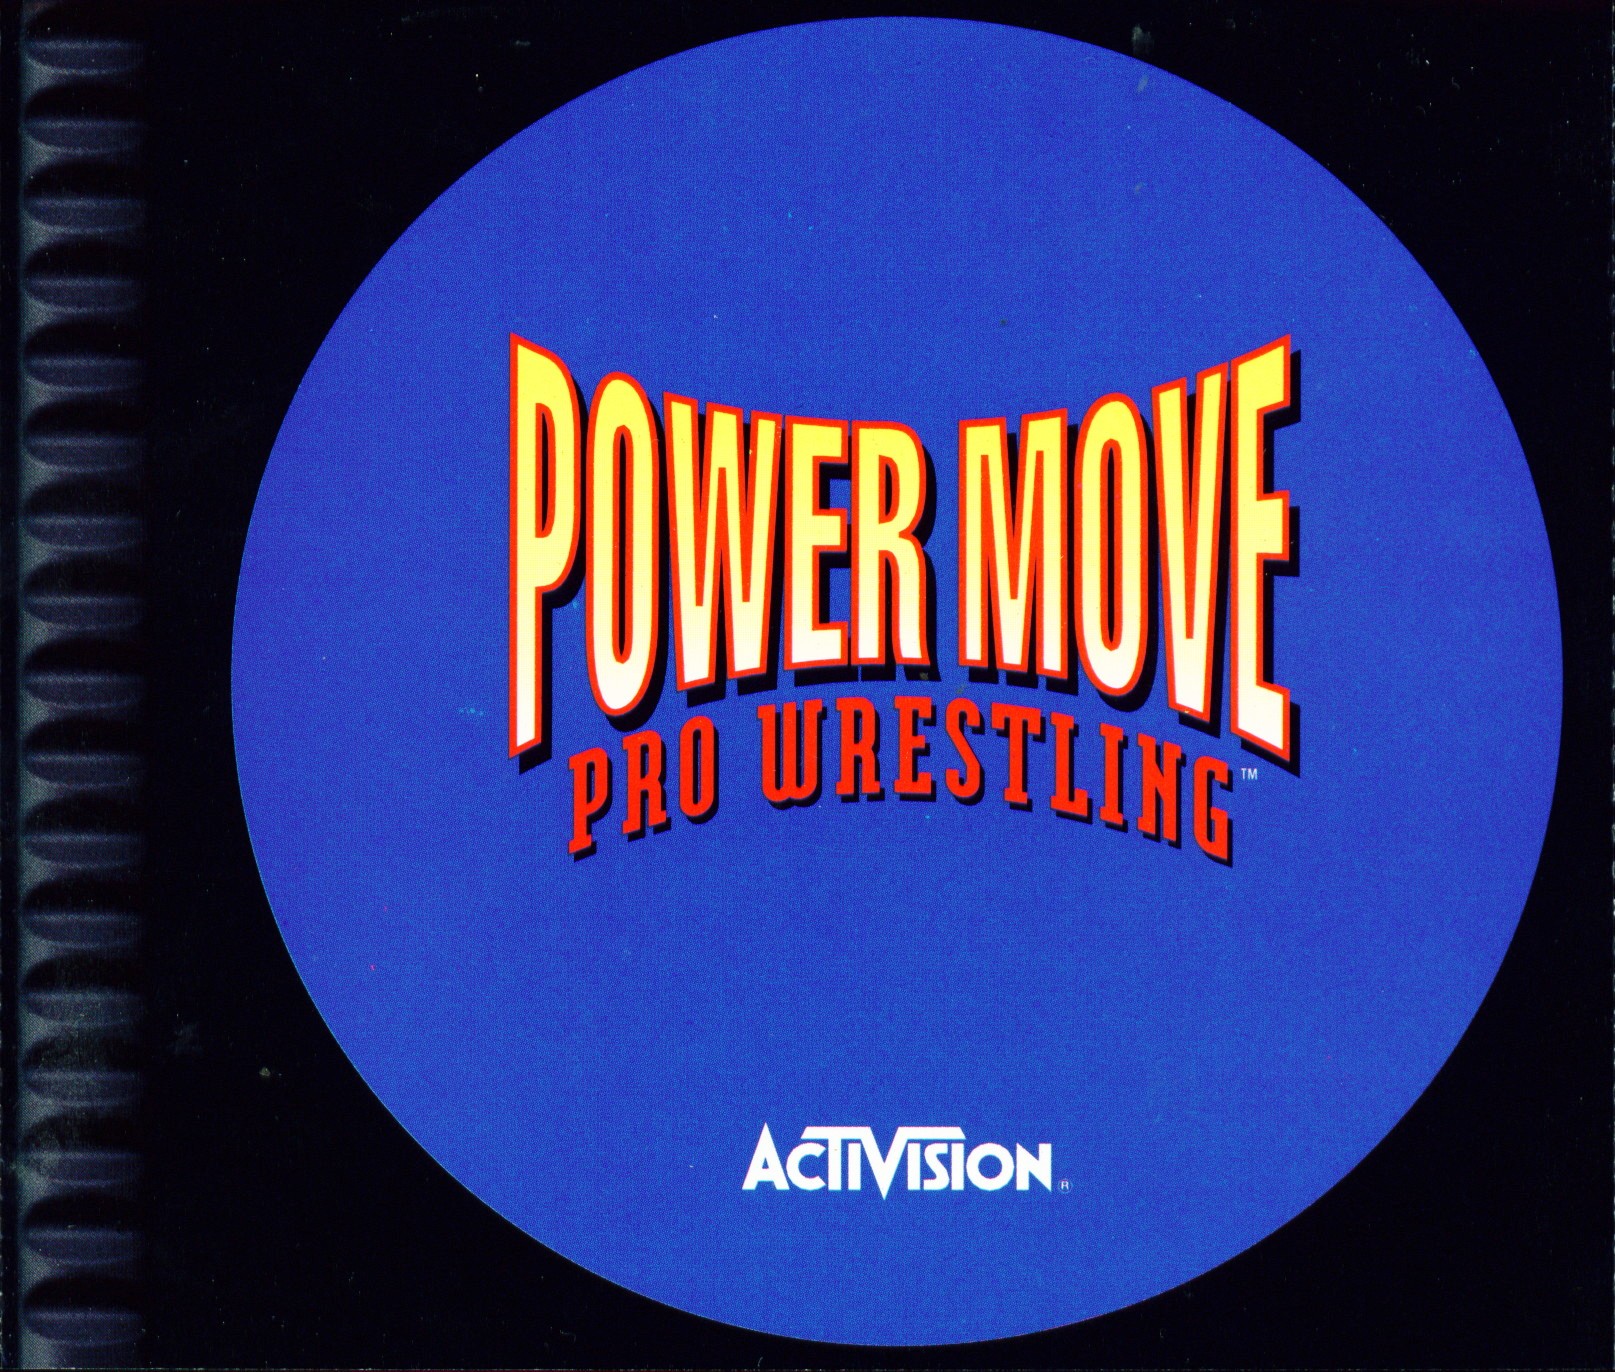 Power Move Pro Wrestling PSX cover